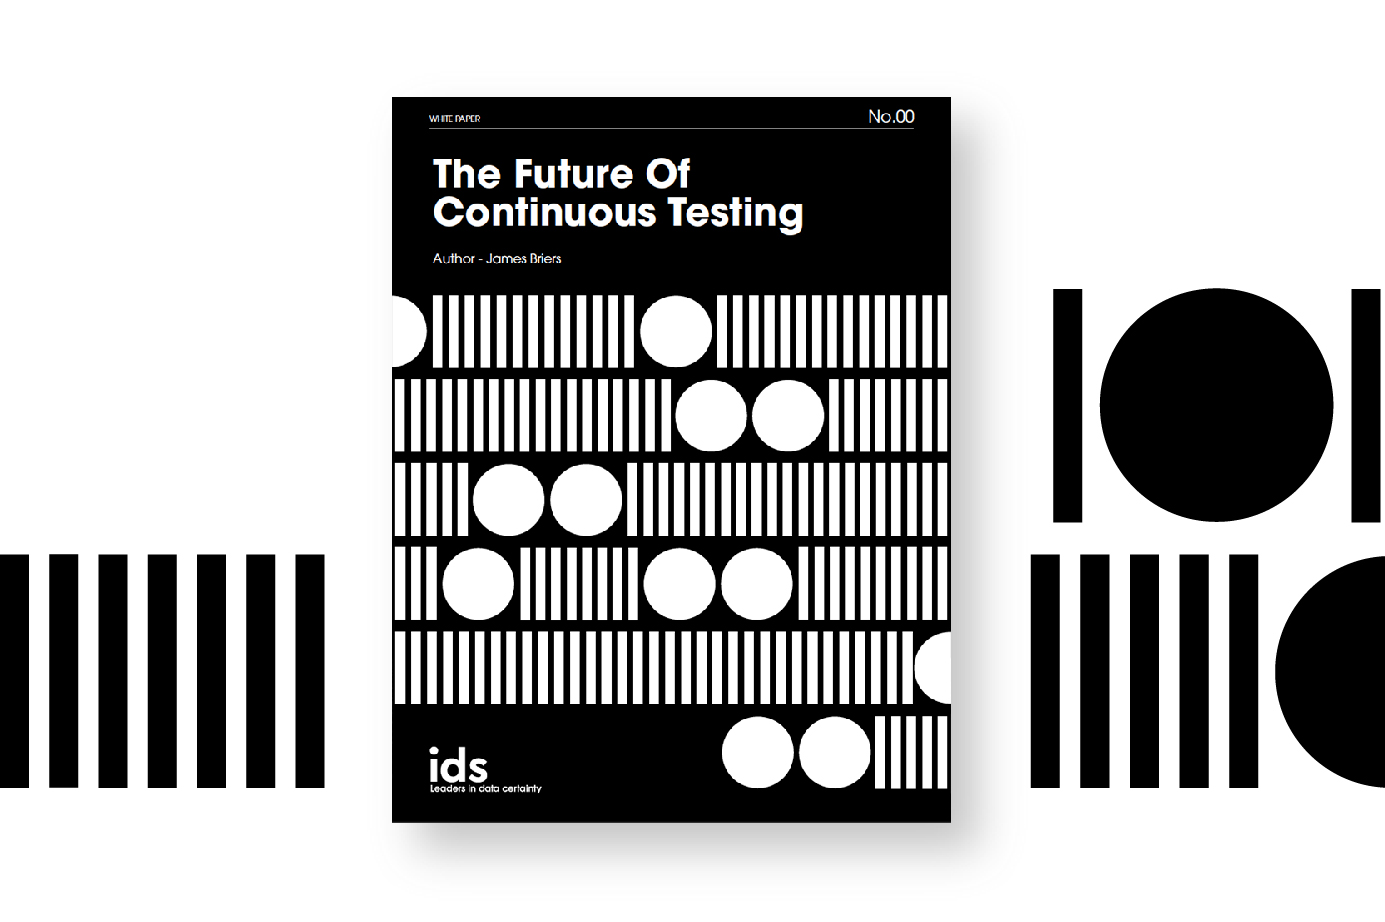 The Future of Continuous Testing - White Paper